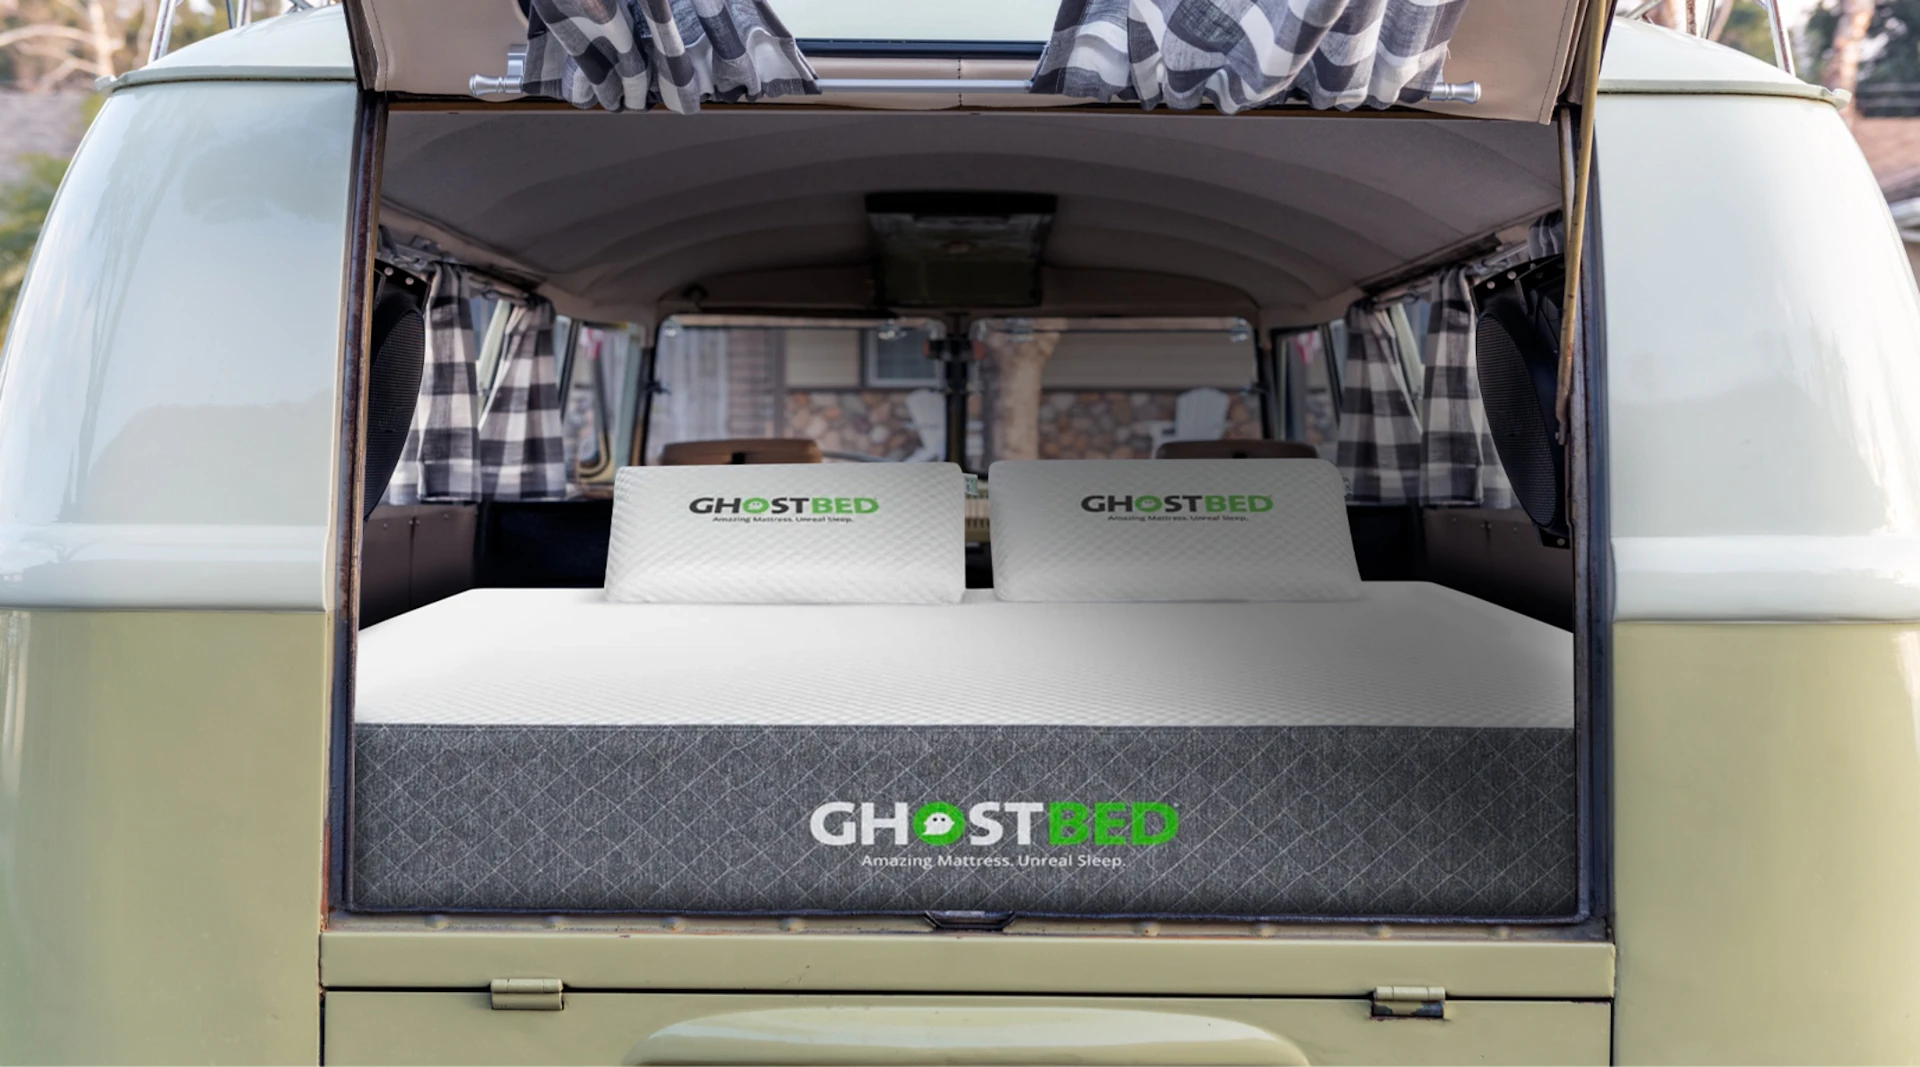 A GhostBed Short Queen RV mattress in the back of a converted van.